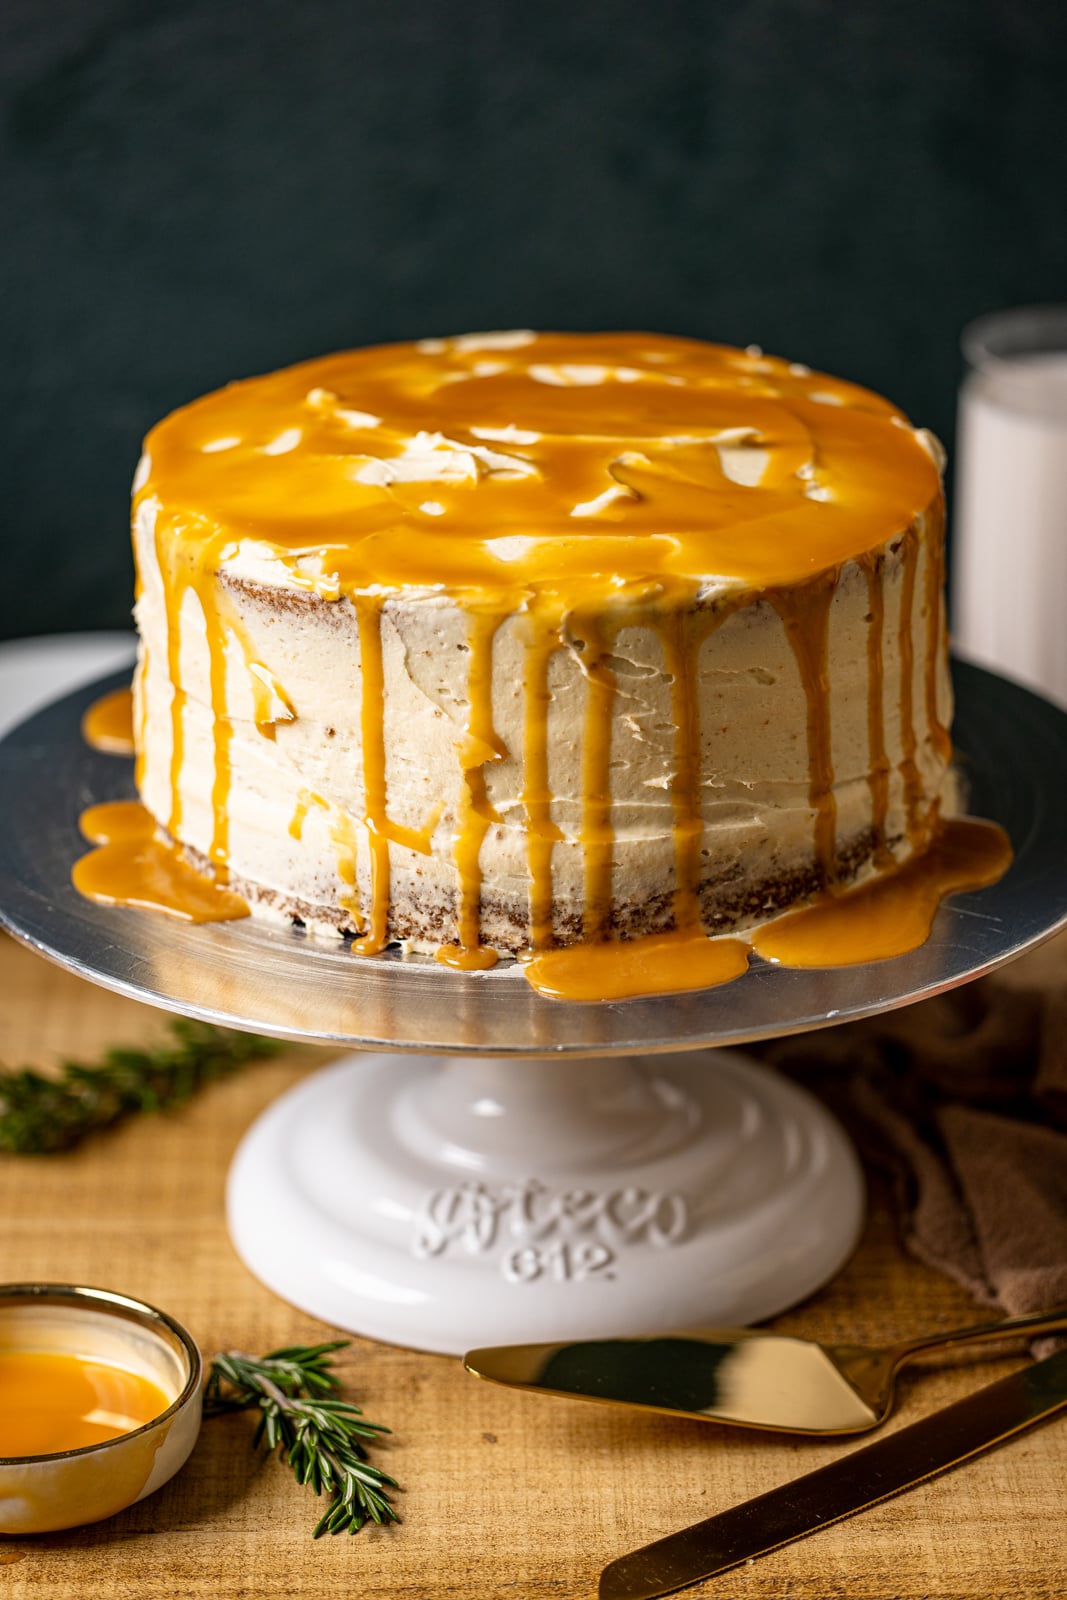 Top view of fully frosted cake with drips of salted caramel on top on a cake stand on a brown table with a dark green background.